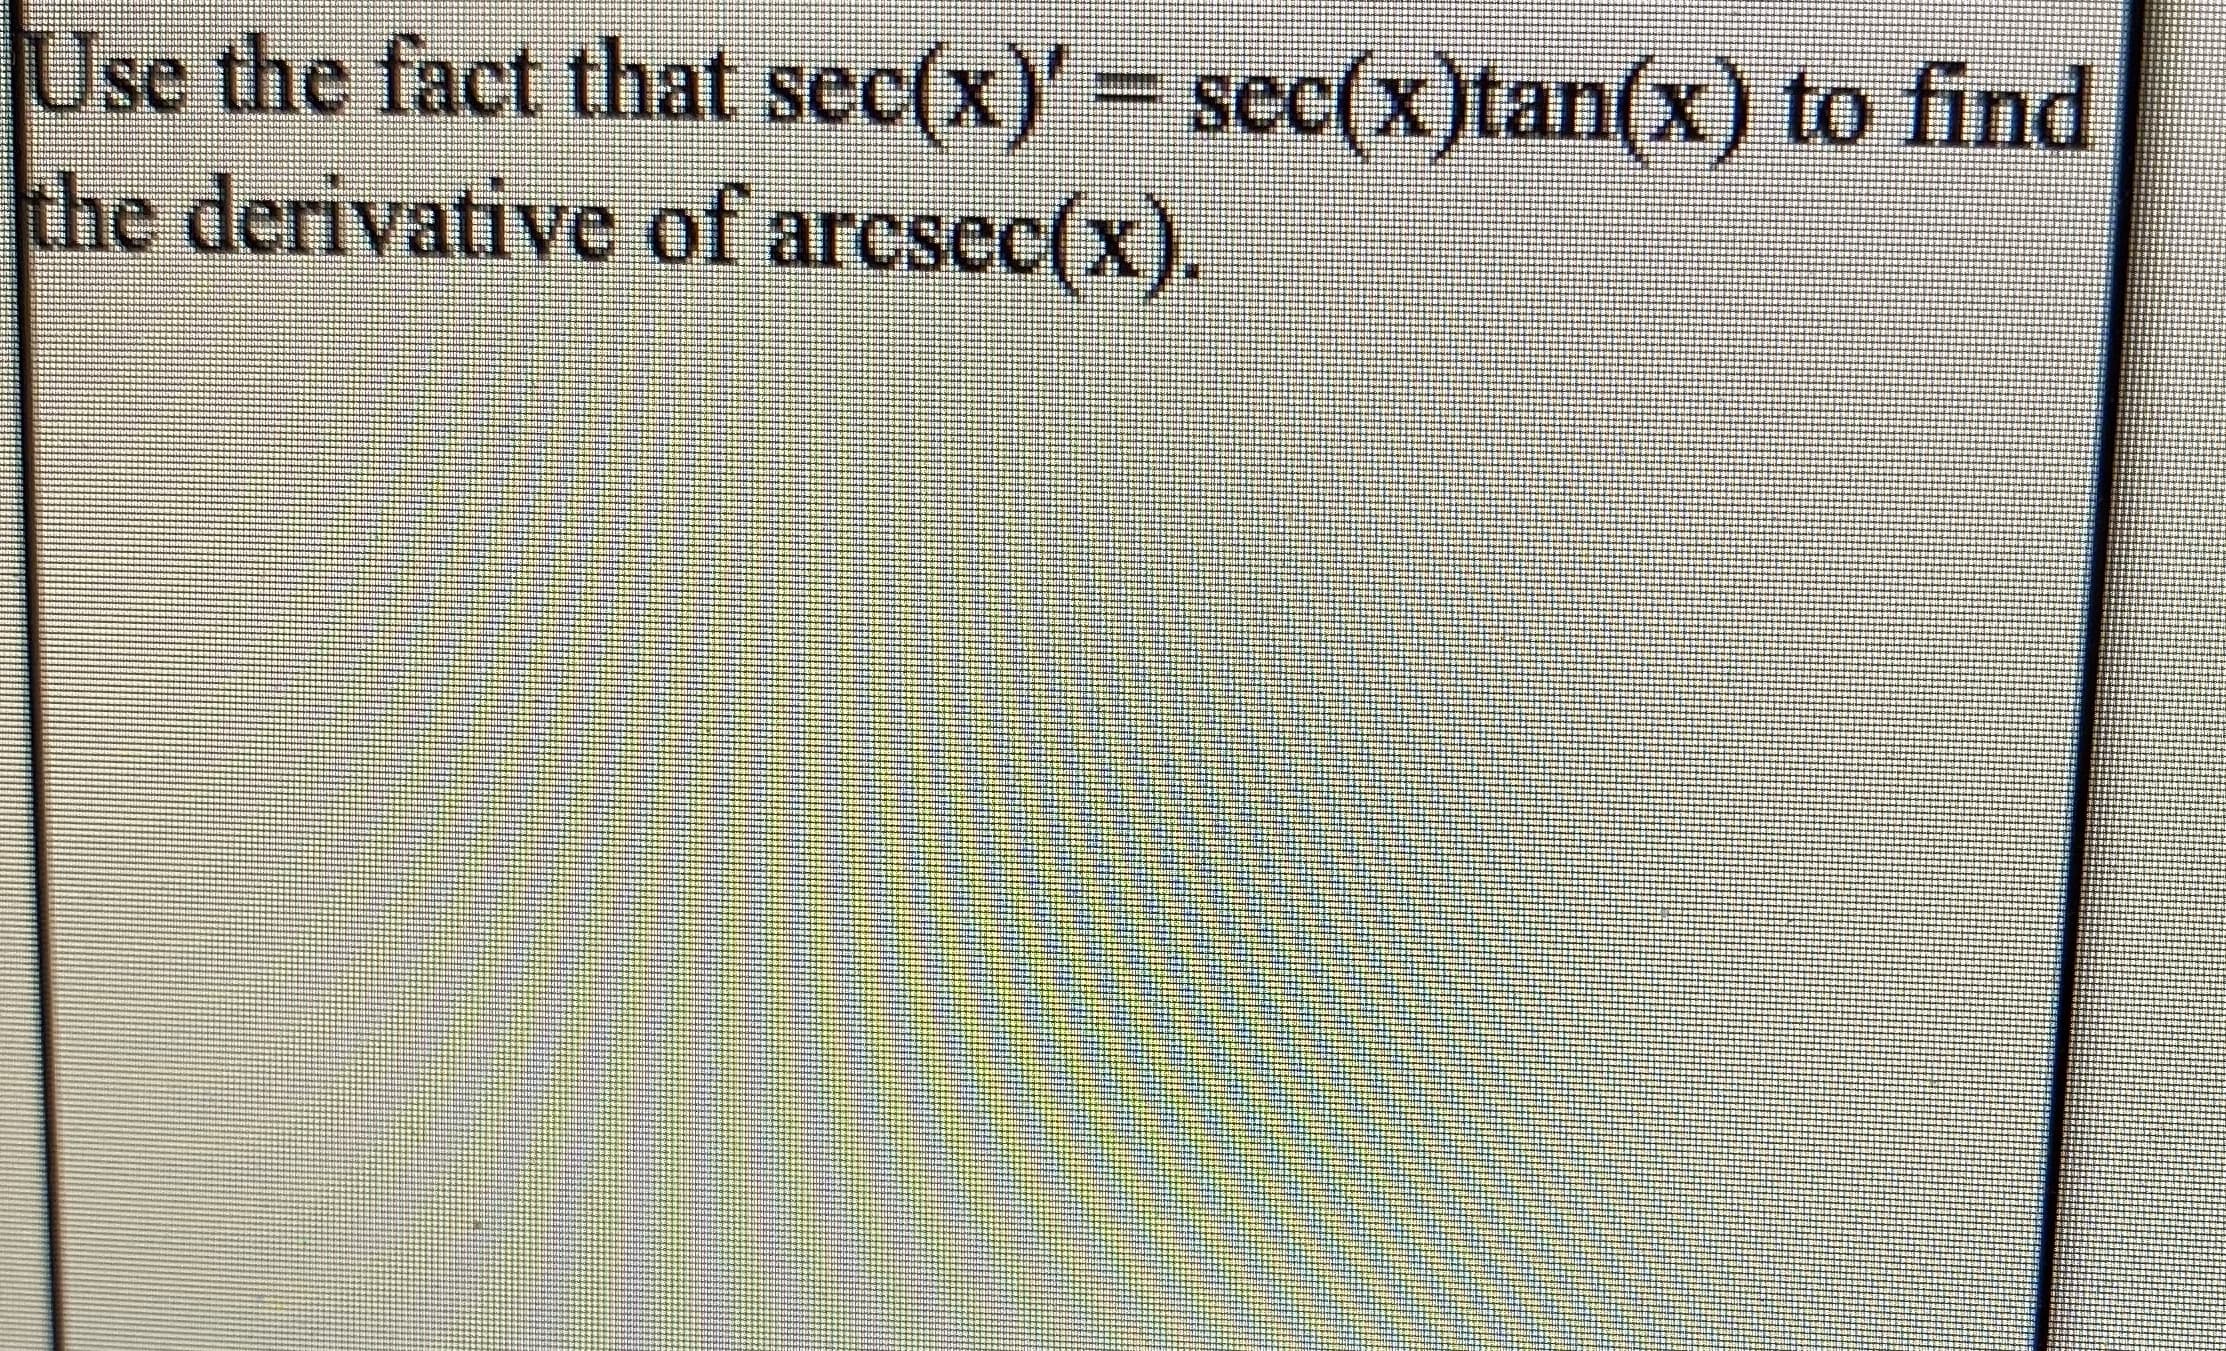 Use the fact that sec(x)'= sec(x)tan(x) to find
the derivative of arcsec(x).
